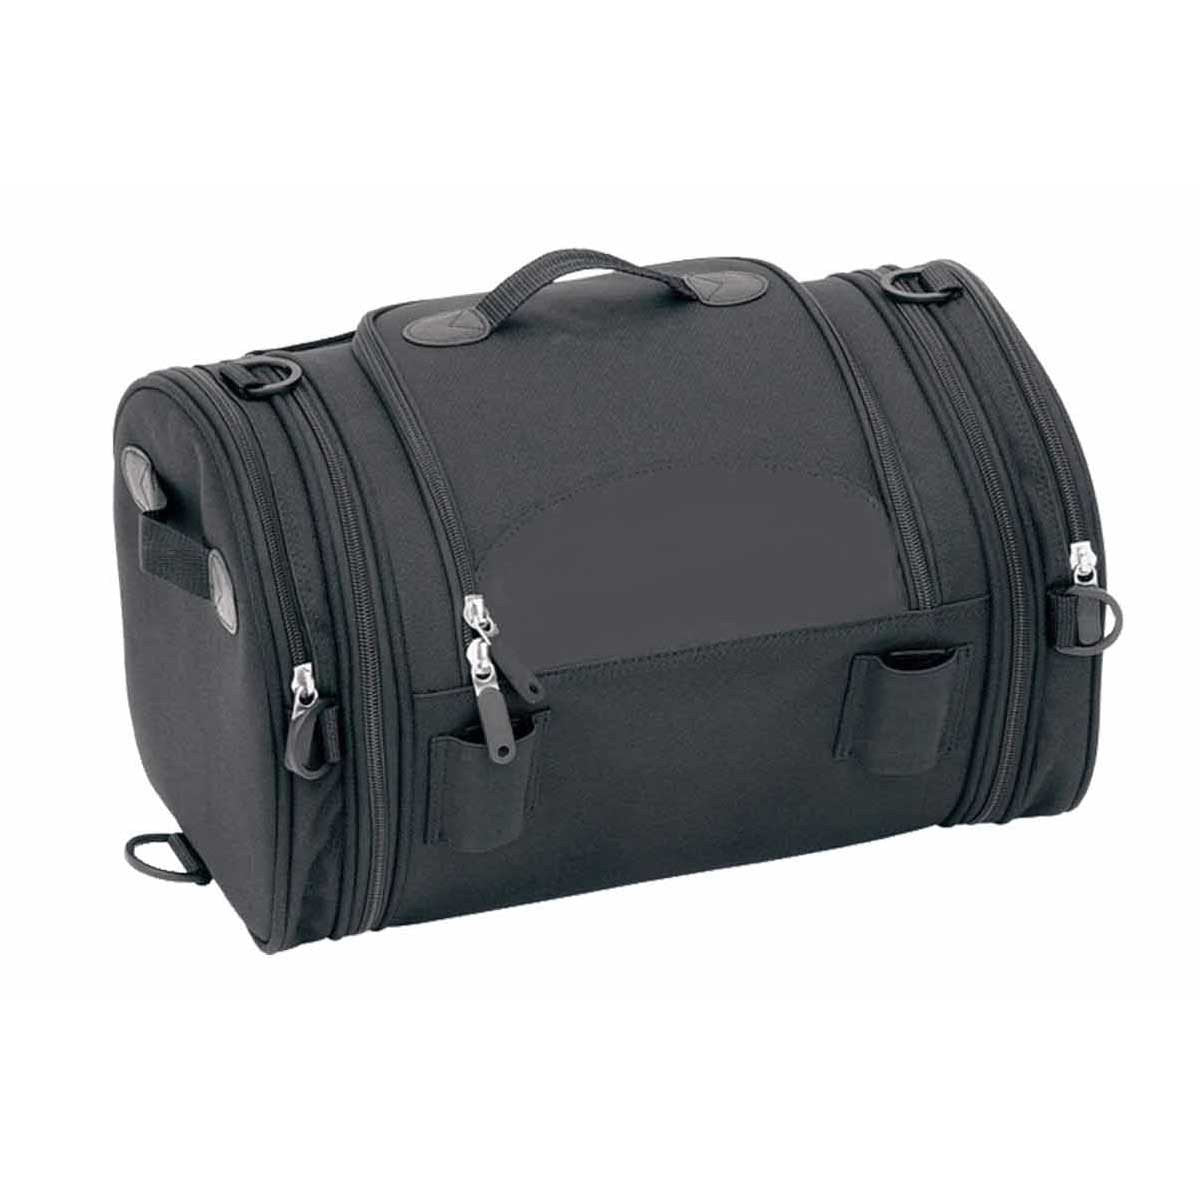 The Vance Leather Expandable Trunk Bag W/Faux Leather Trim features faux leather trim and sissy bar straps for added style, while also being constructed with durable Cordura fabric.